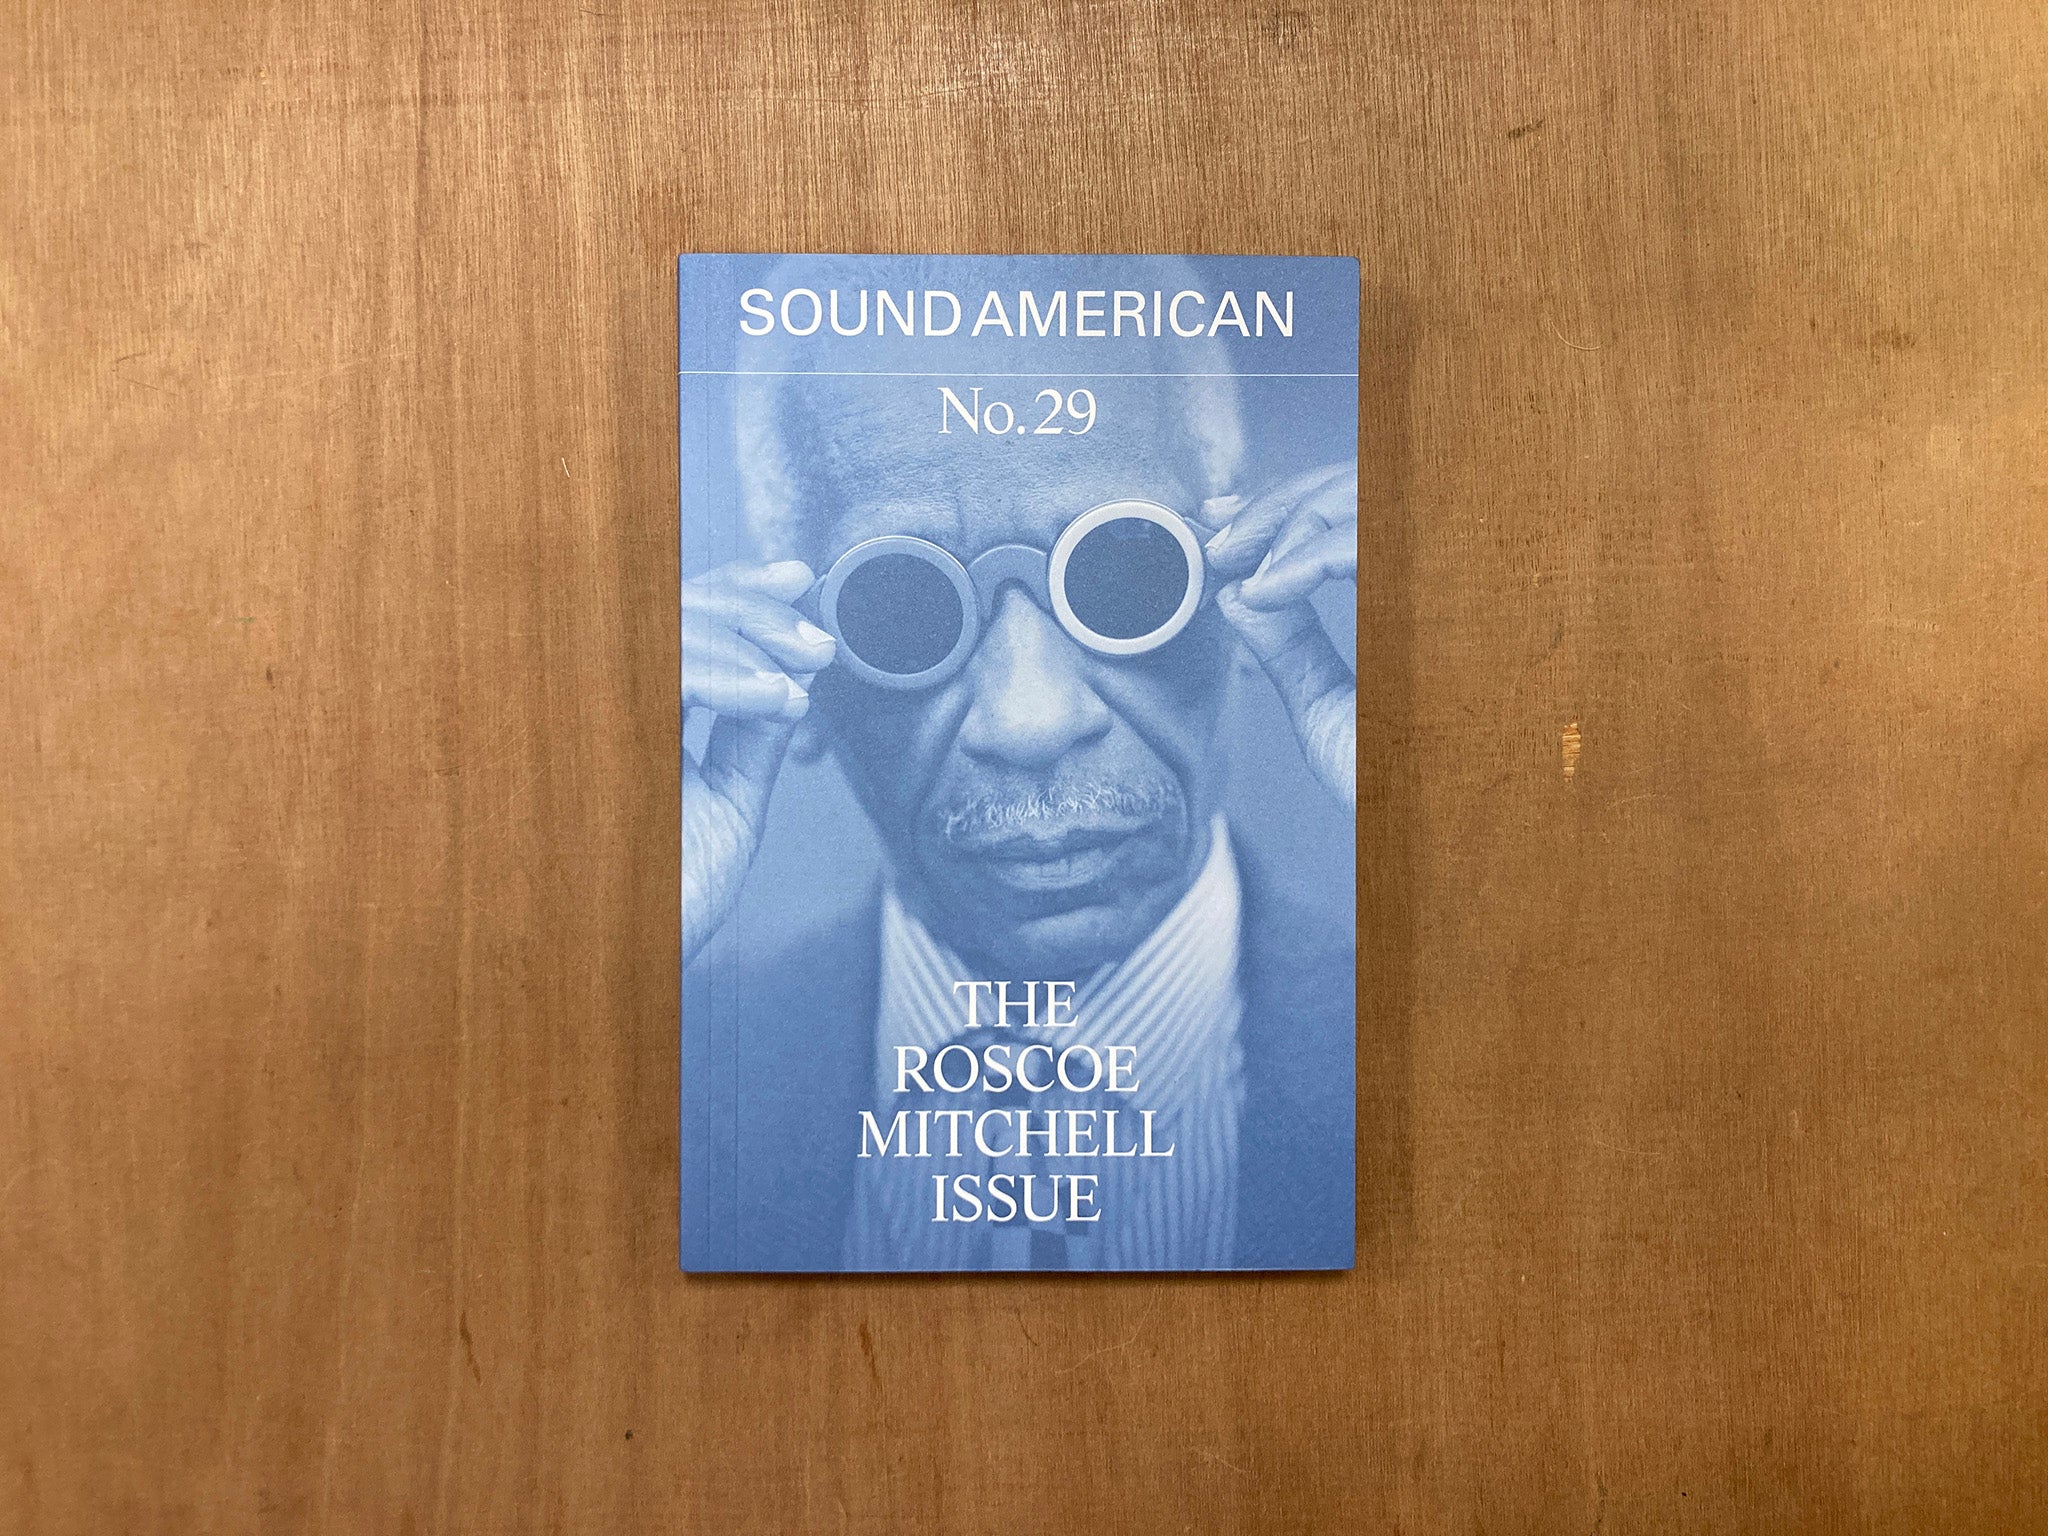 SOUND AMERICAN #29 – THE ROSCOE MITCHELL ISSUE